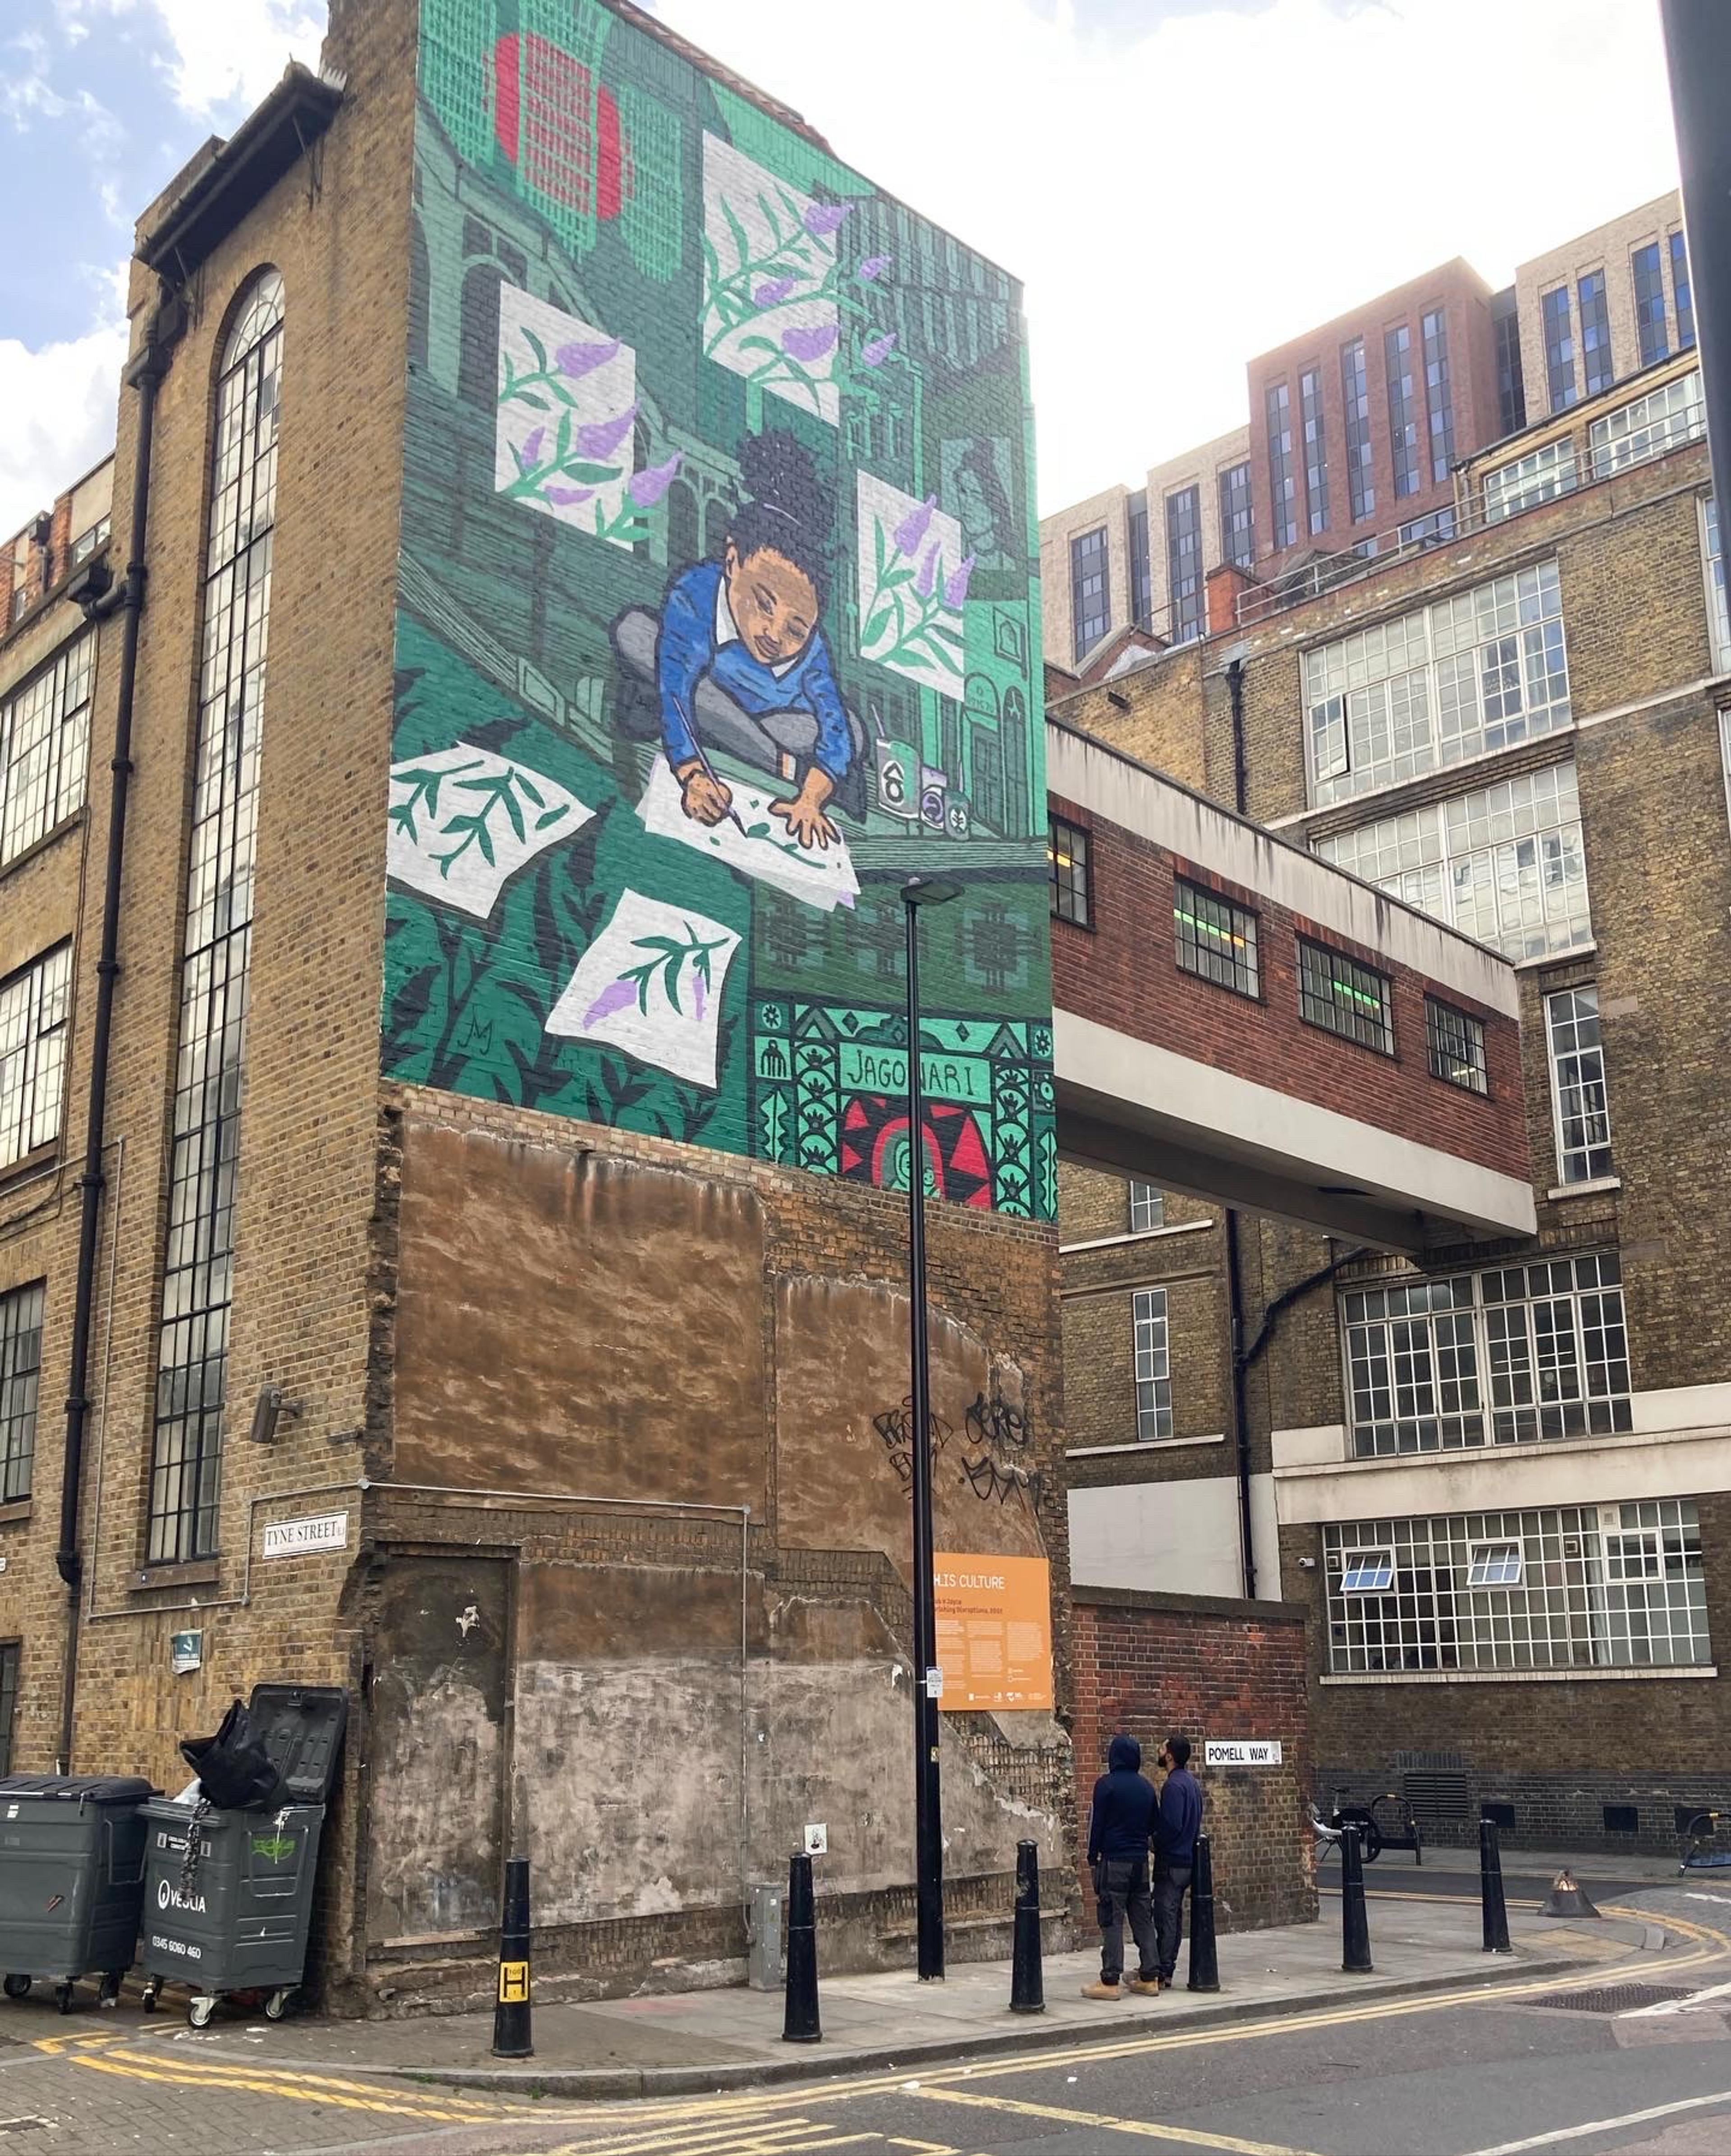 Photograph of the side of a tall brick building, surrounded by other buildings, with a painted mural of a small child sitting cross-legged drawing flowers on sheets of paper, with some of them featured around here. The background is a green scene.